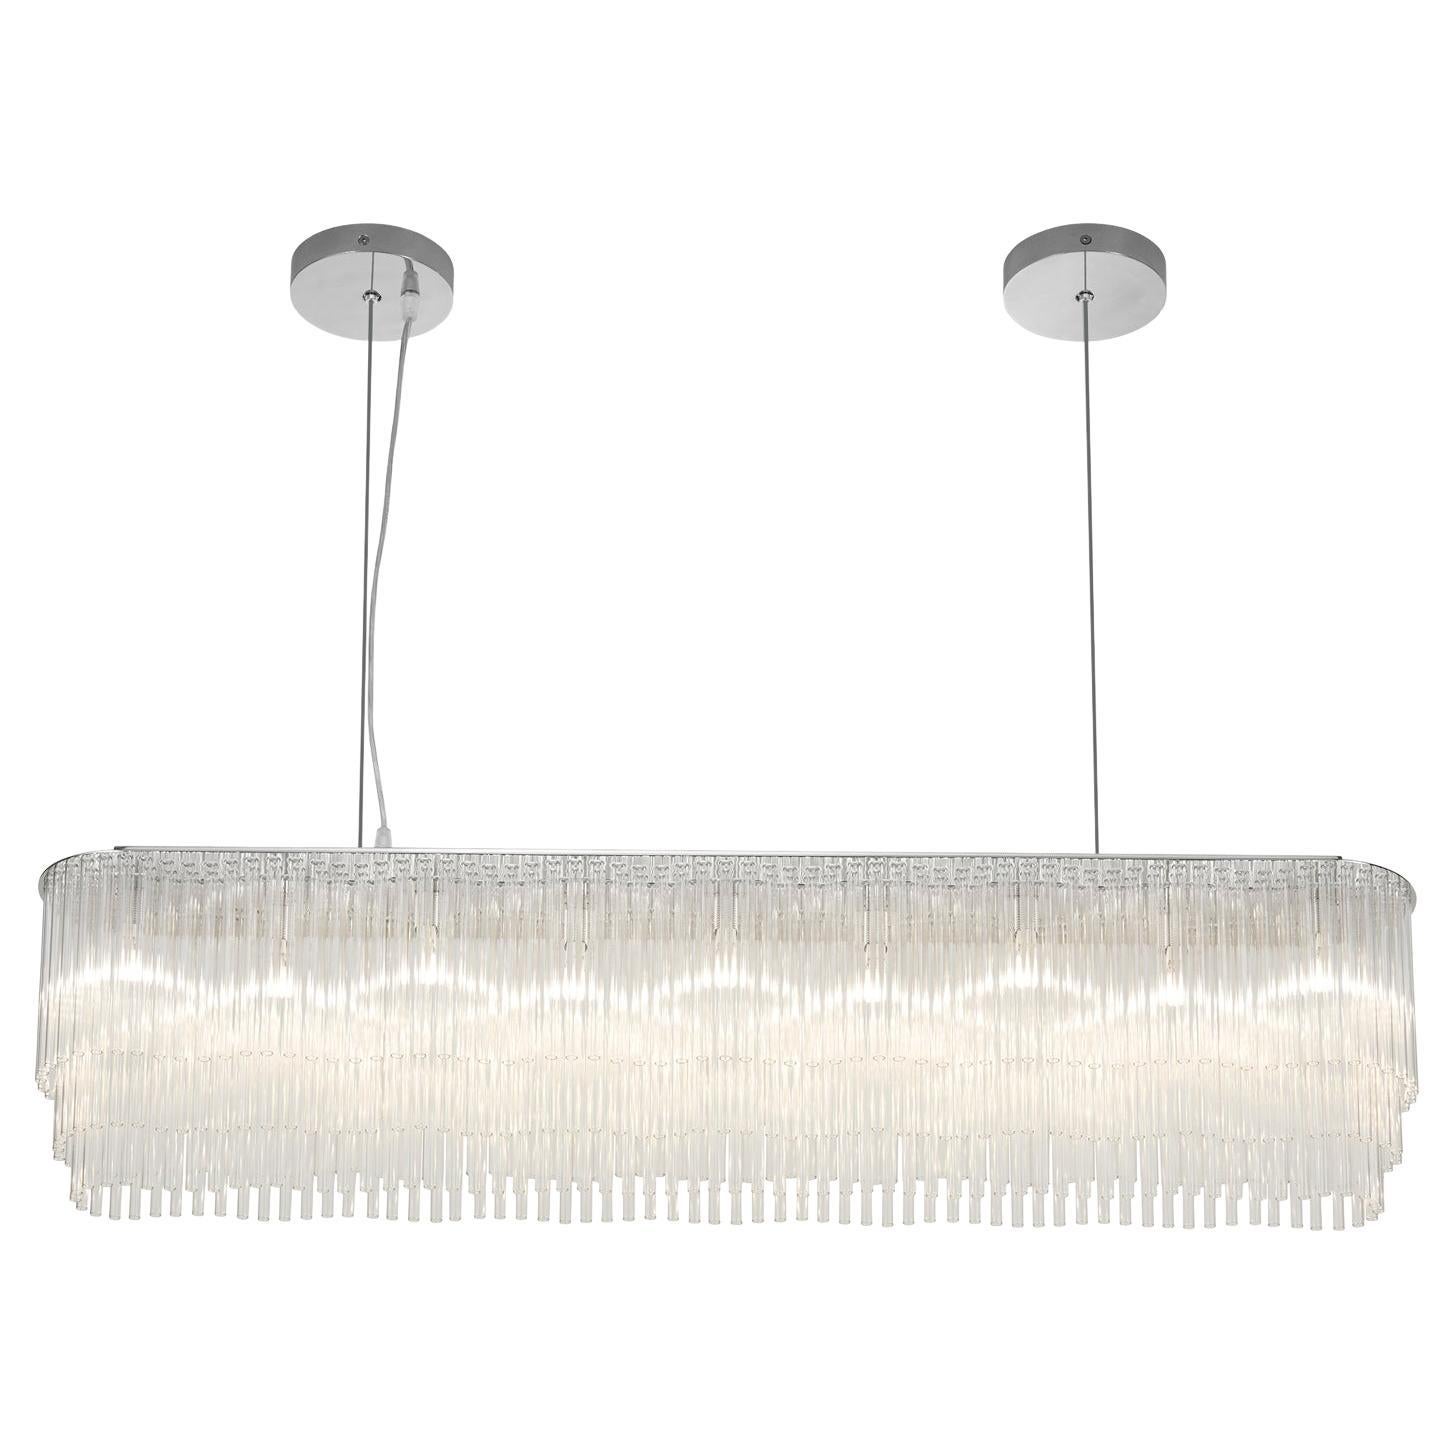 Linear Chandelier Thin 1010mm/39.75" in Polished Nickel / Tiered Glass Profile